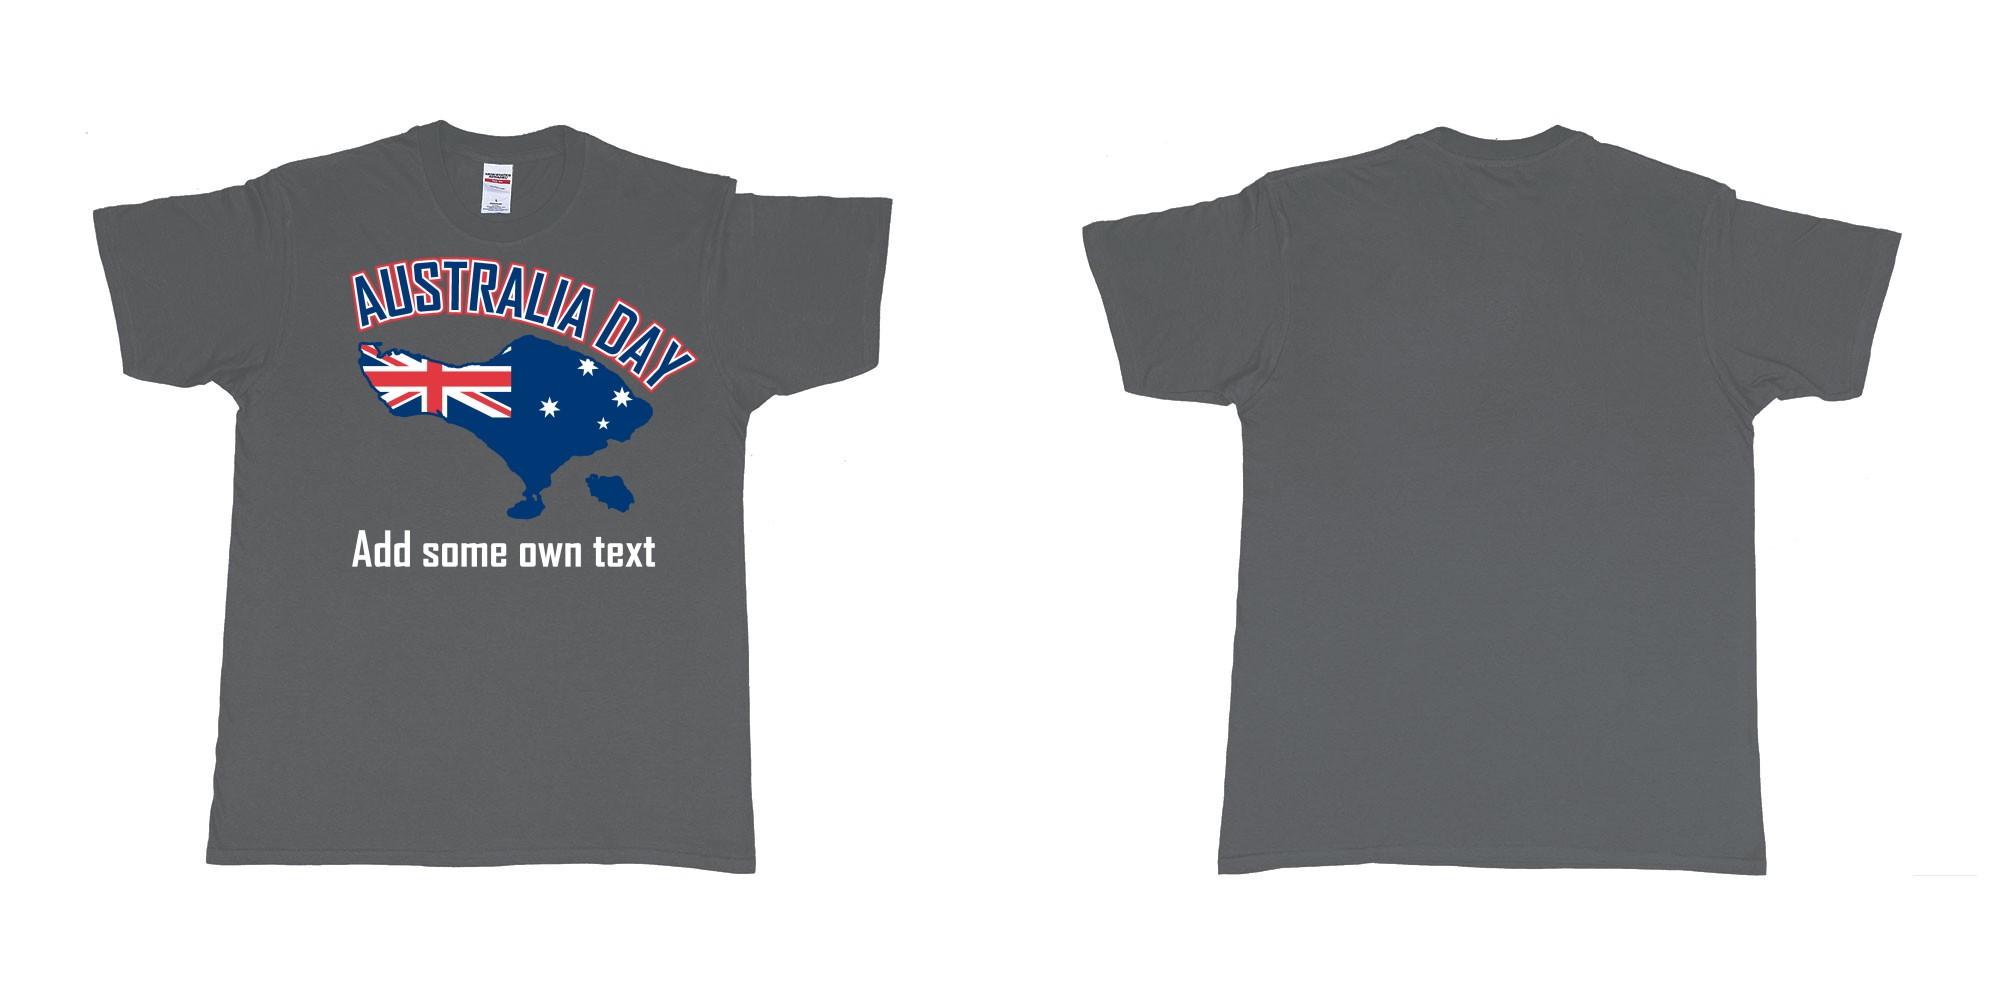 Custom tshirt design australia day in bali custom teeshirt printing in fabric color charcoal choice your own text made in Bali by The Pirate Way